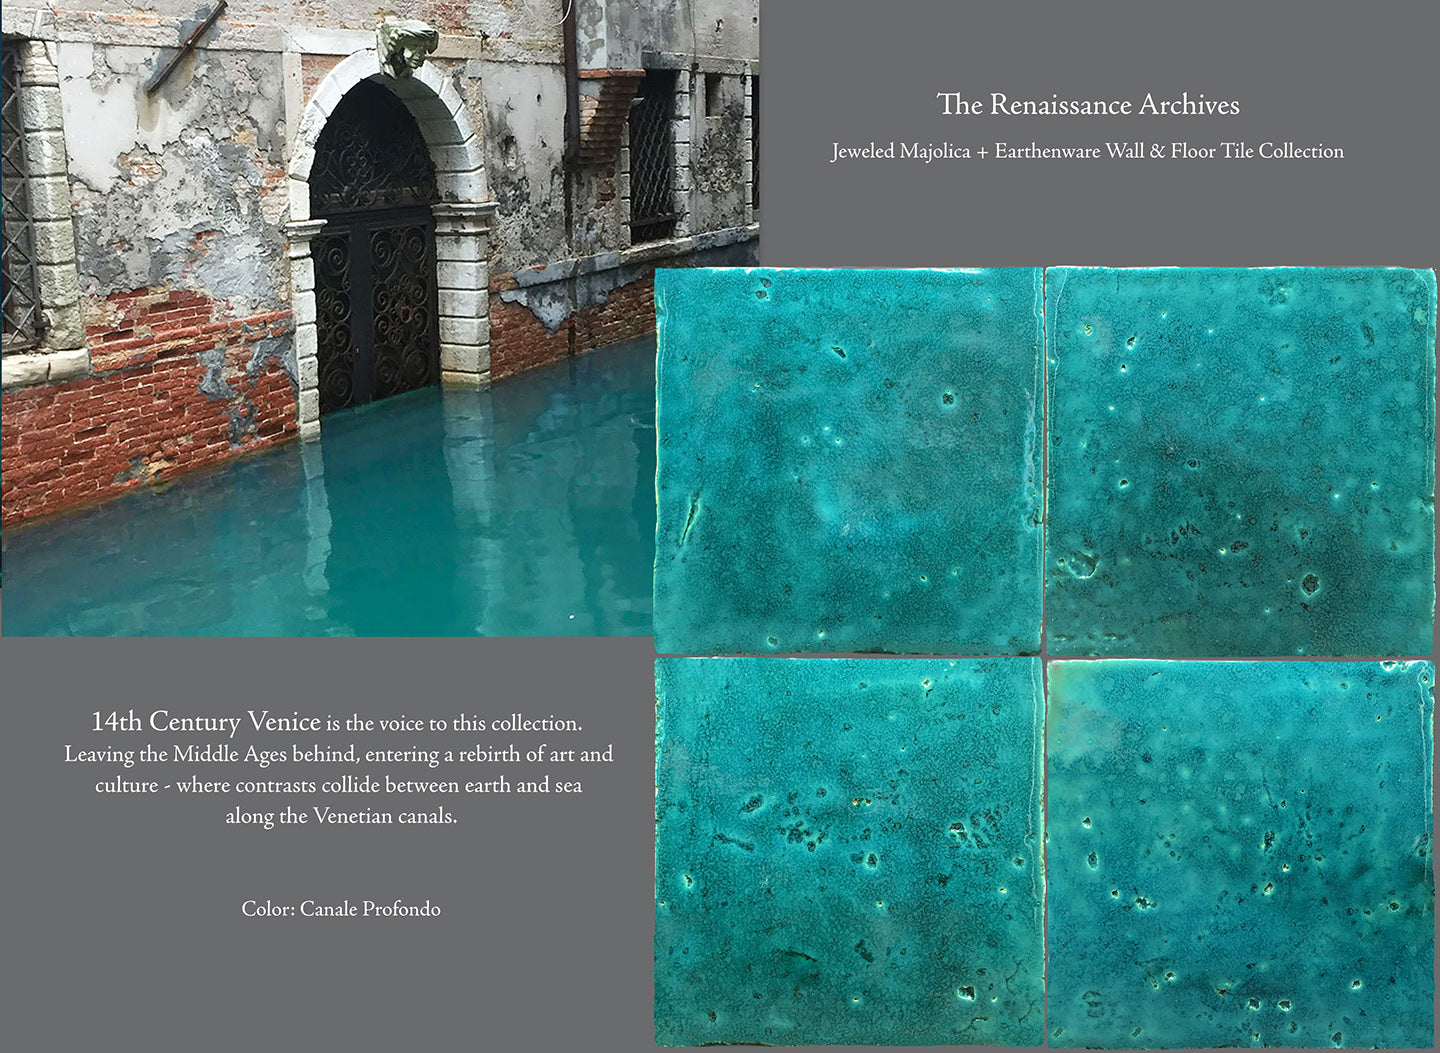 The Renaissance Archives - an Italian Majolica and Earthenware Terra Cotta Tile Collection